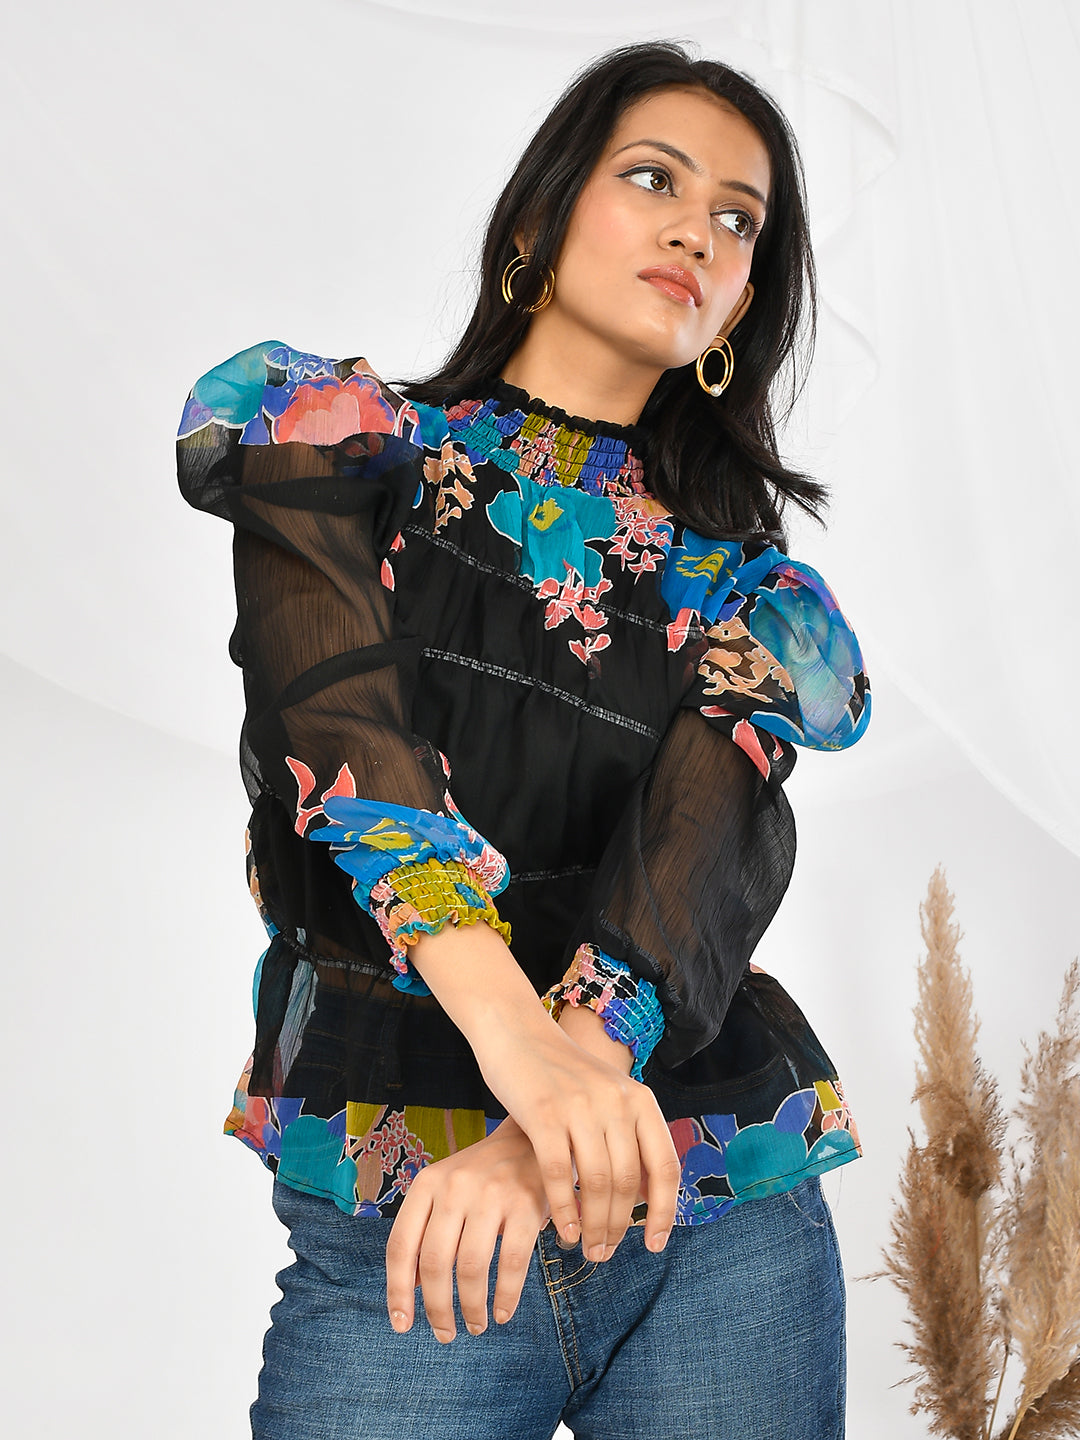 This Floral Printed Chiffon High Neck Top is the perfect addition to any wardrobe. Made from high quality chiffon fabric, it is lightweight and comfortable to wear. The floral print adds a touch of femininity, while the high neck design adds a touch of elegance. Perfect for girls and women of all ages, this top is versatile and stylish for any occasion.